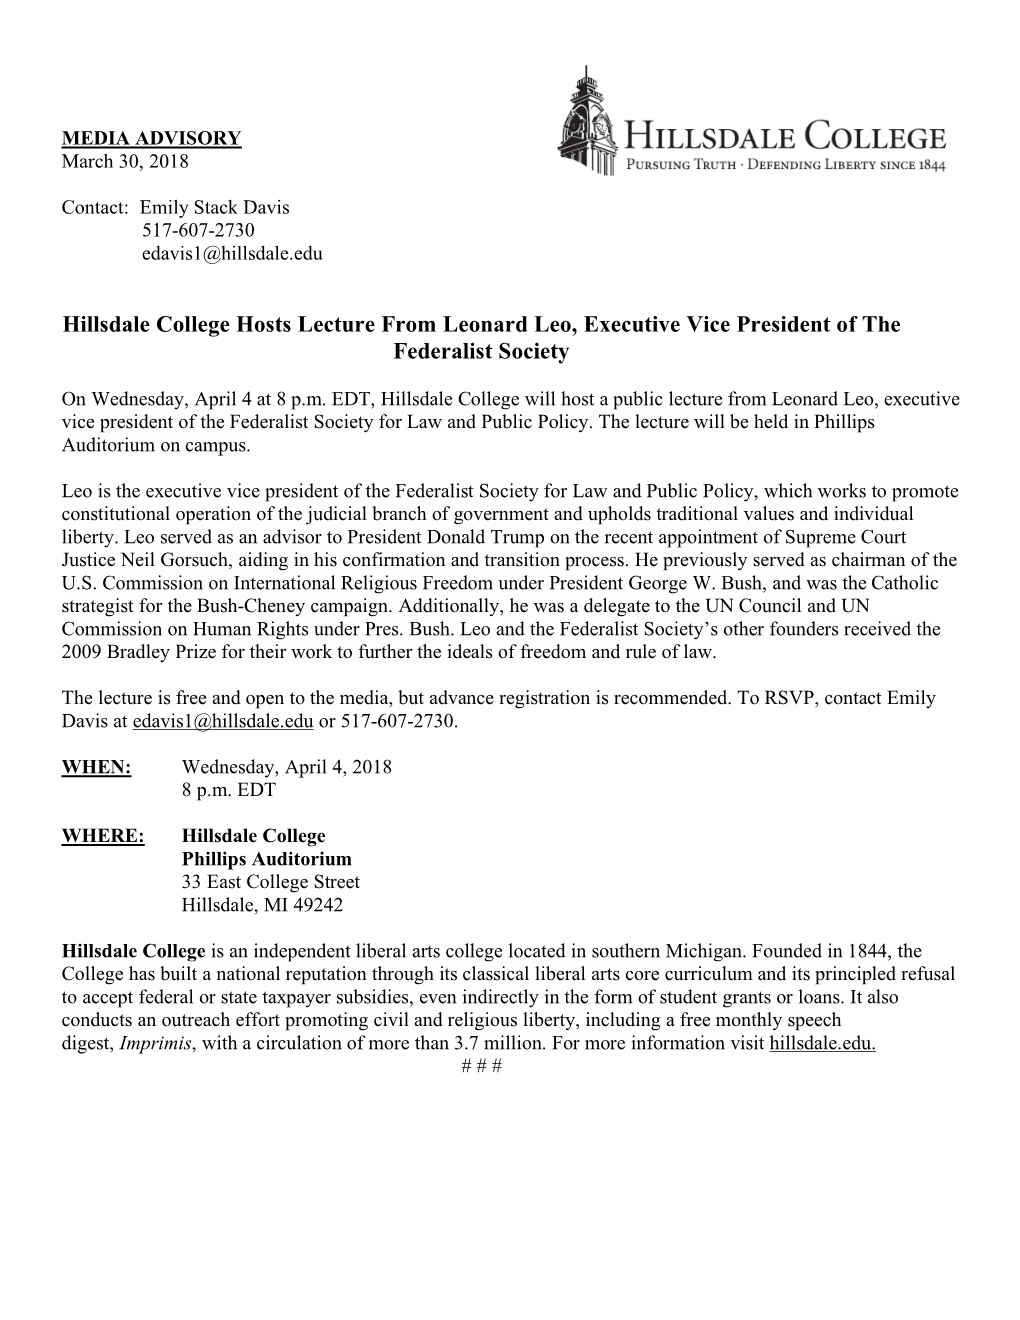 Hillsdale College Hosts Lecture from Leonard Leo, Executive Vice President of the Federalist Society